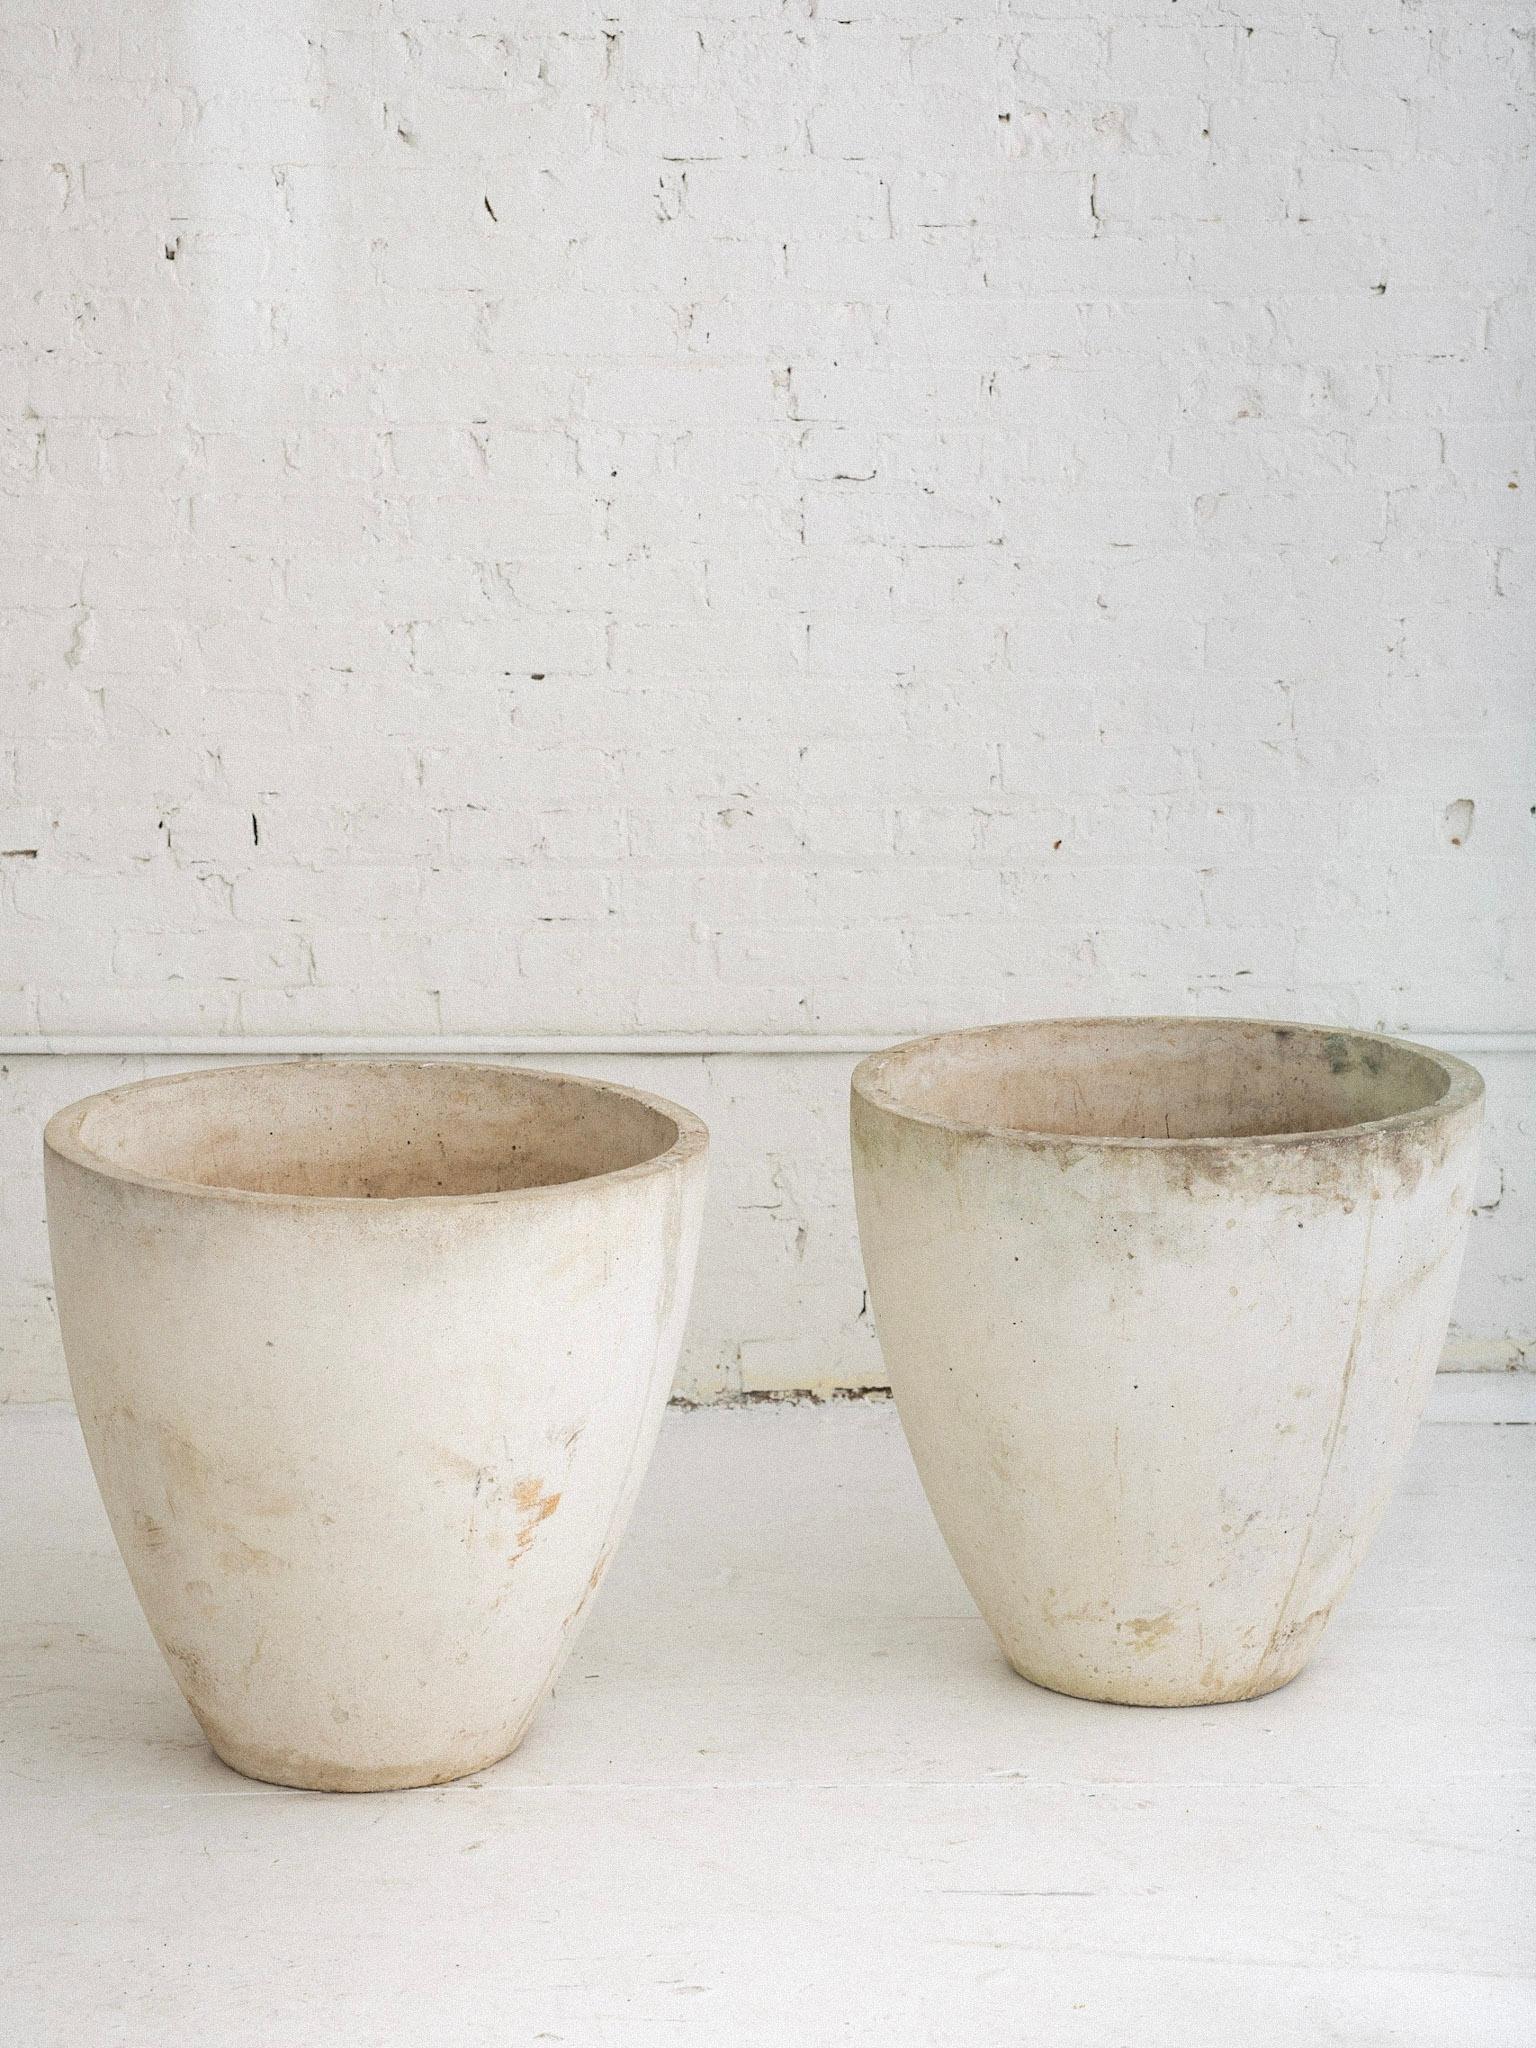 A pair of large concrete cast stone planters. Tapered cylinder silhouettes. Features drainage holes. Chalky white / grey finish with a weathered patina. Heavy solid pieces.